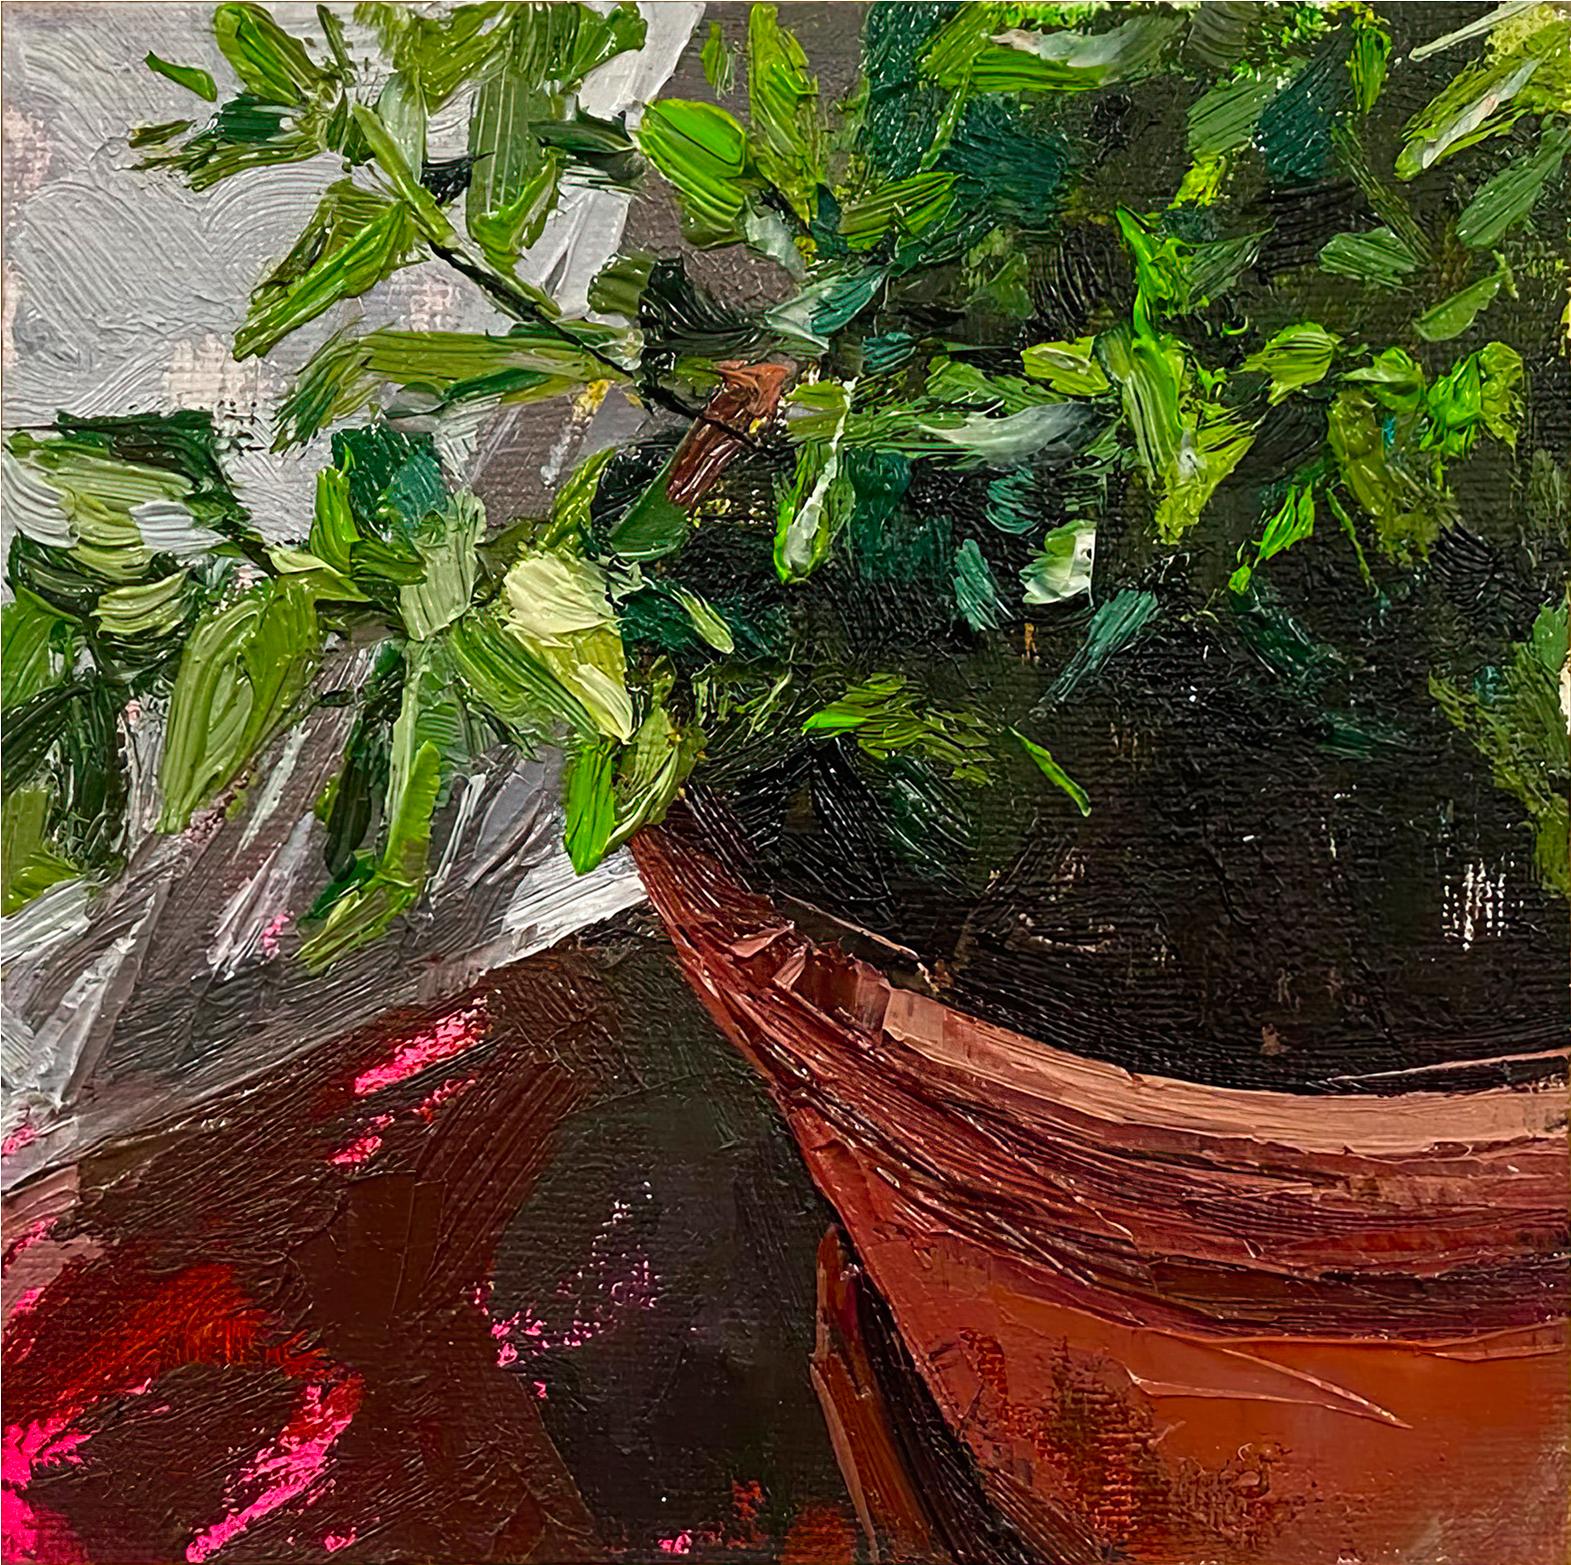 "Pot Plants 2" Original Oil and Acrylic Painting